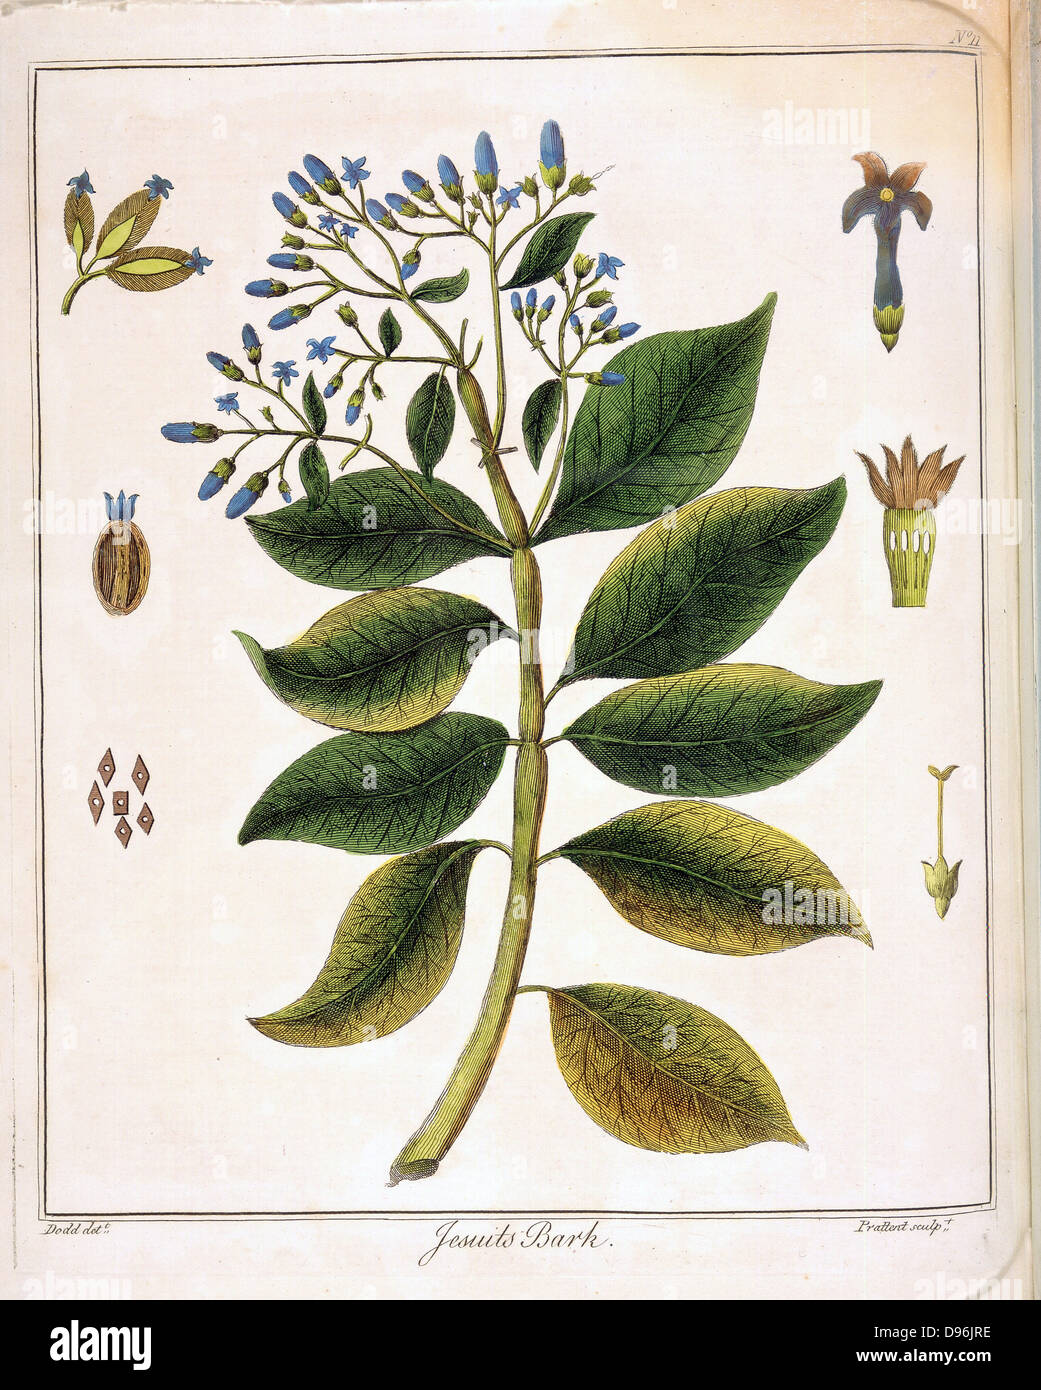 Cinchona (Jesuit's or Peruvian Bark). Source of quinine. Used as febrifuge, particularly in treatment of malaria. Hand-coloured engraving,  London 1795 Stock Photo